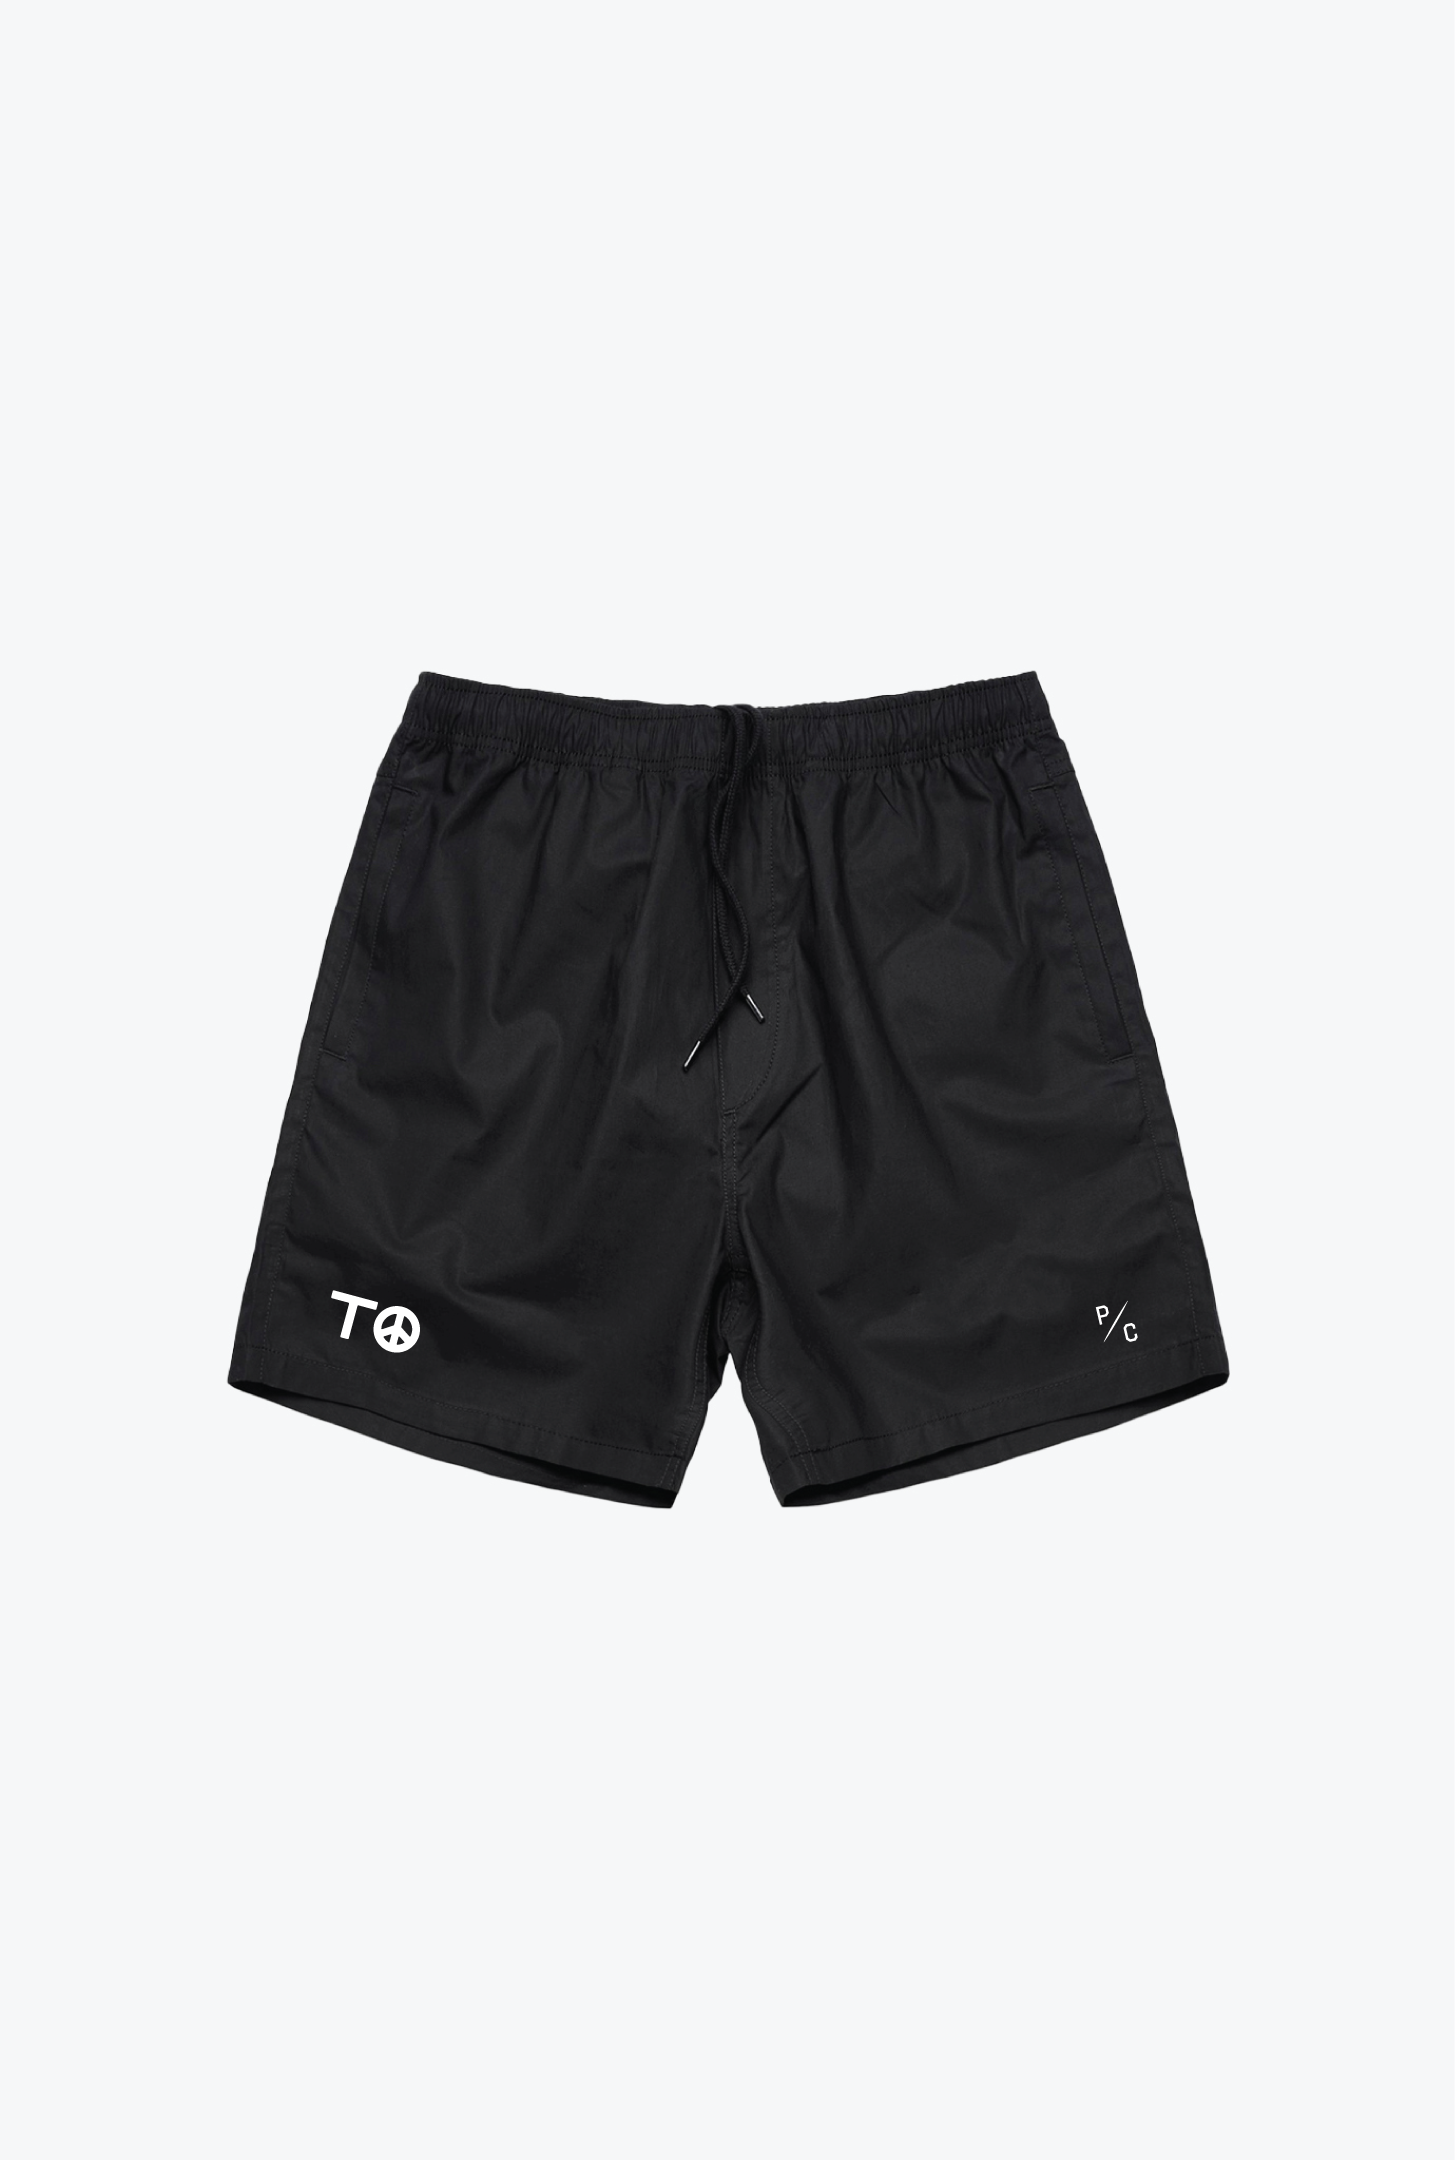 "TO" Peace Sign Board Shorts - Black